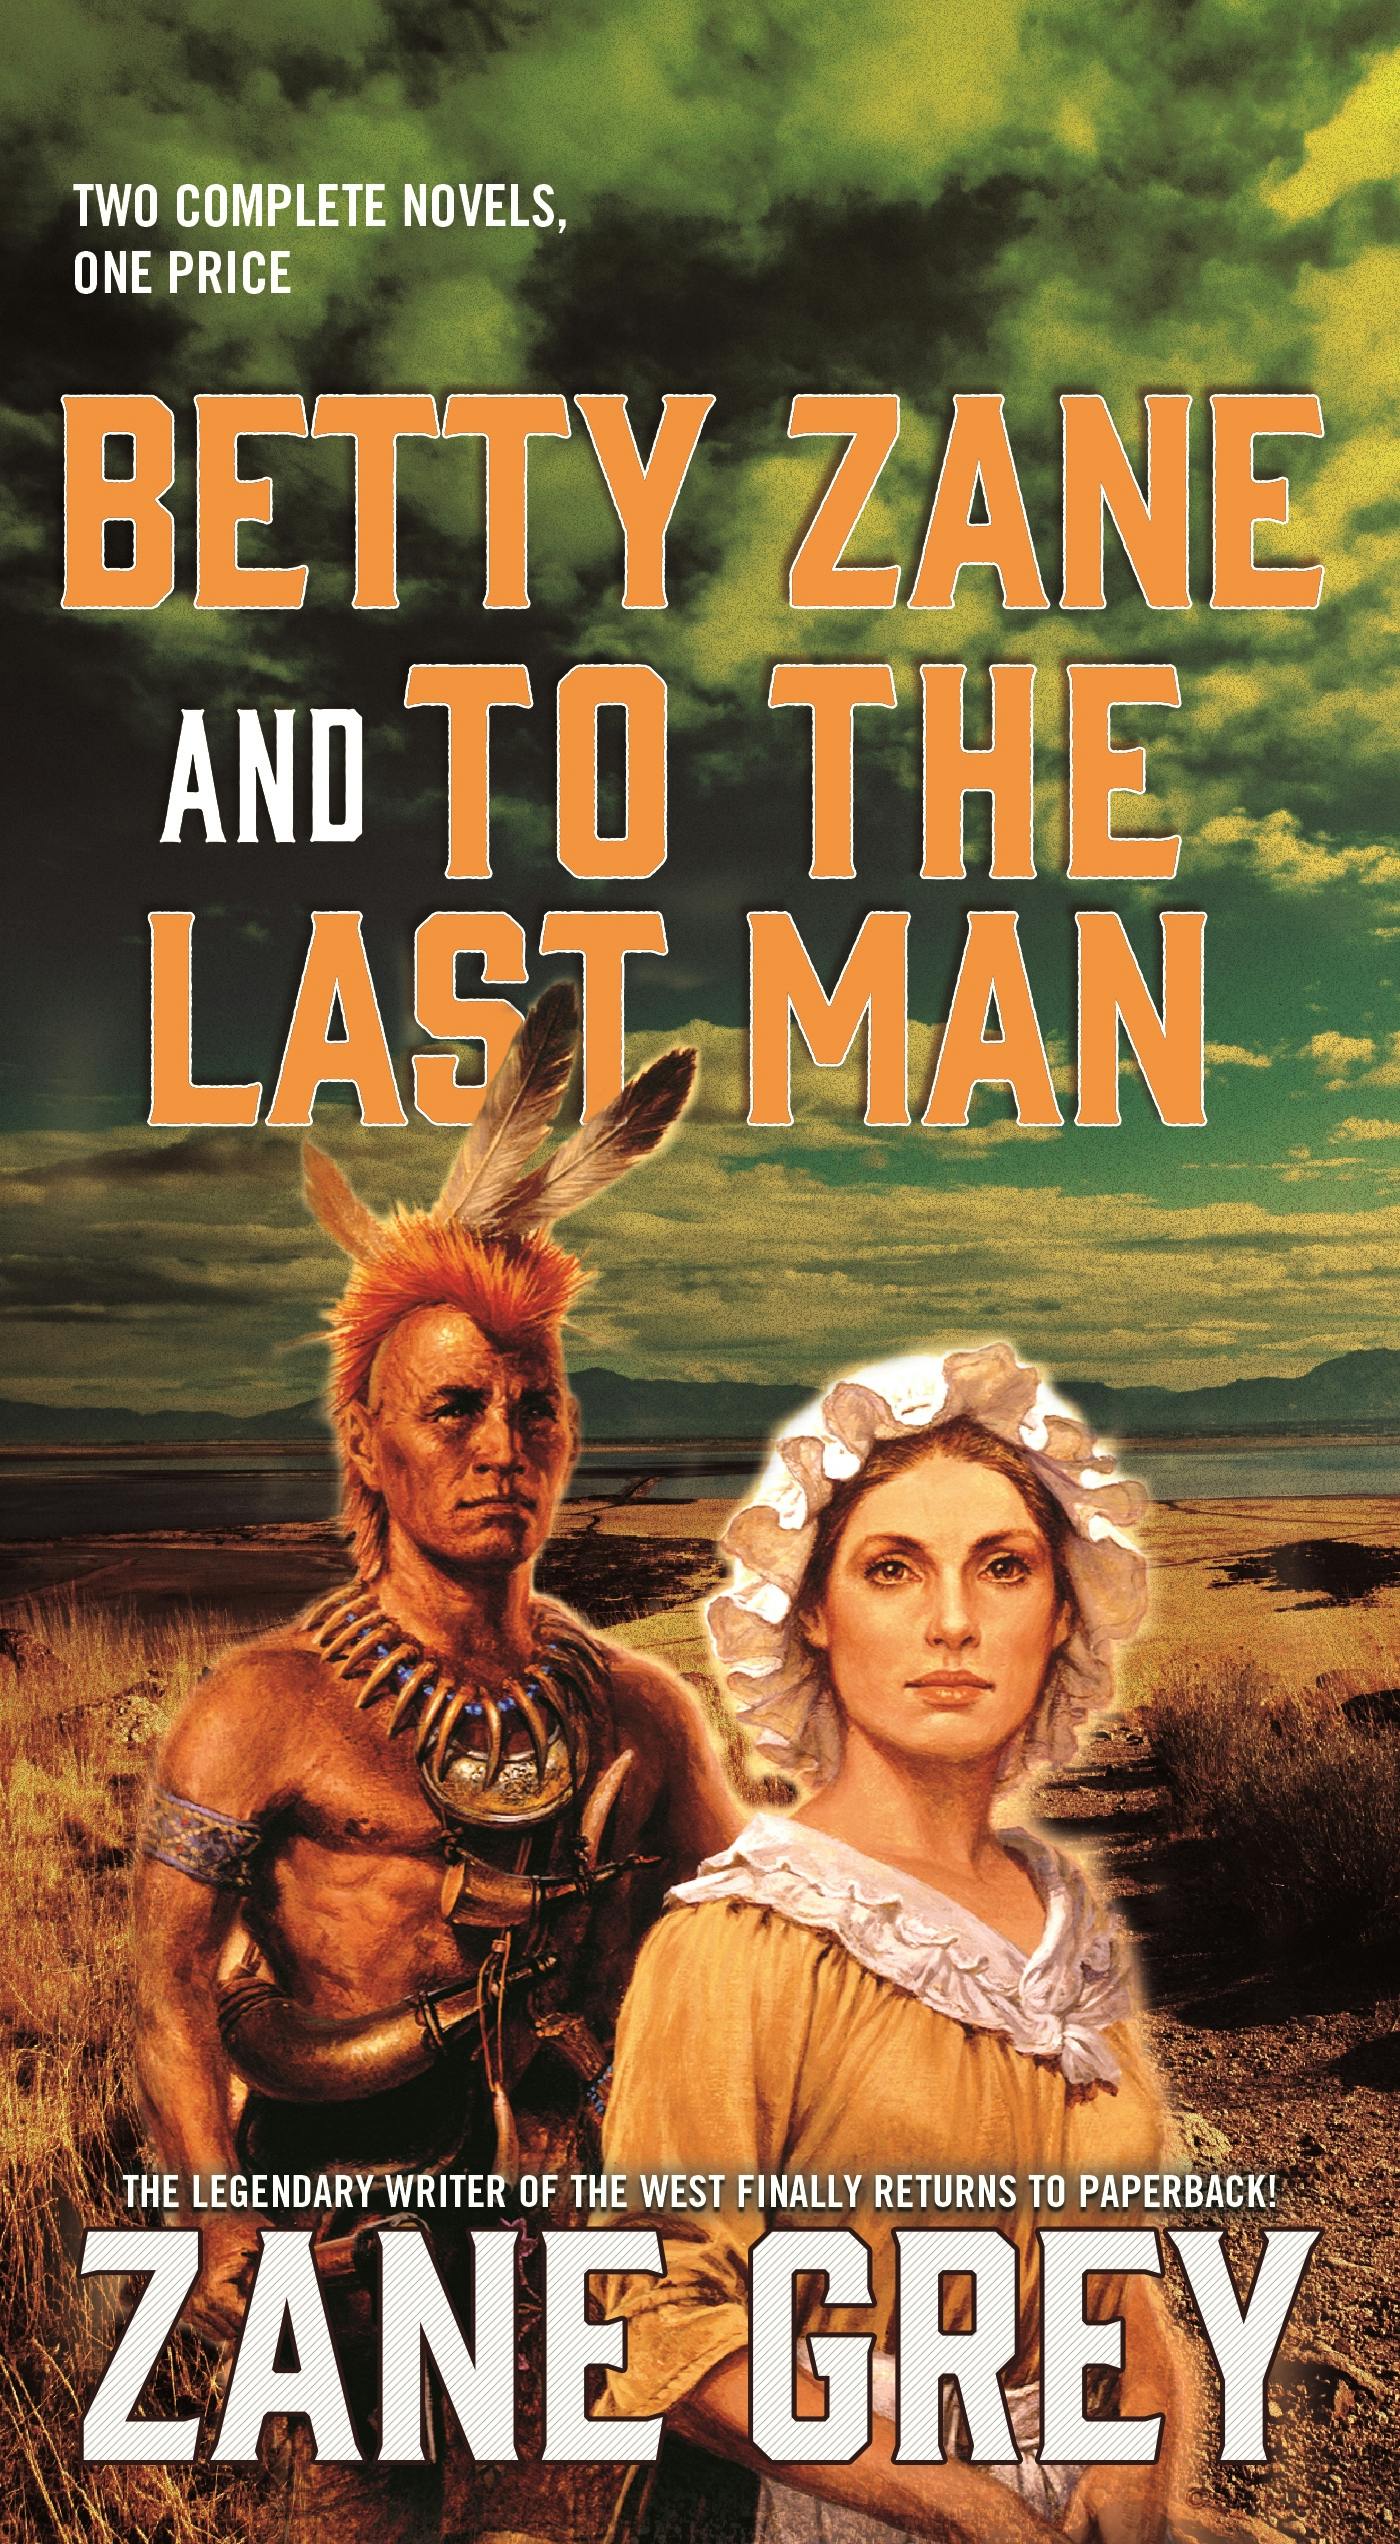 Cover for the book titled as: Betty Zane and To the Last Man